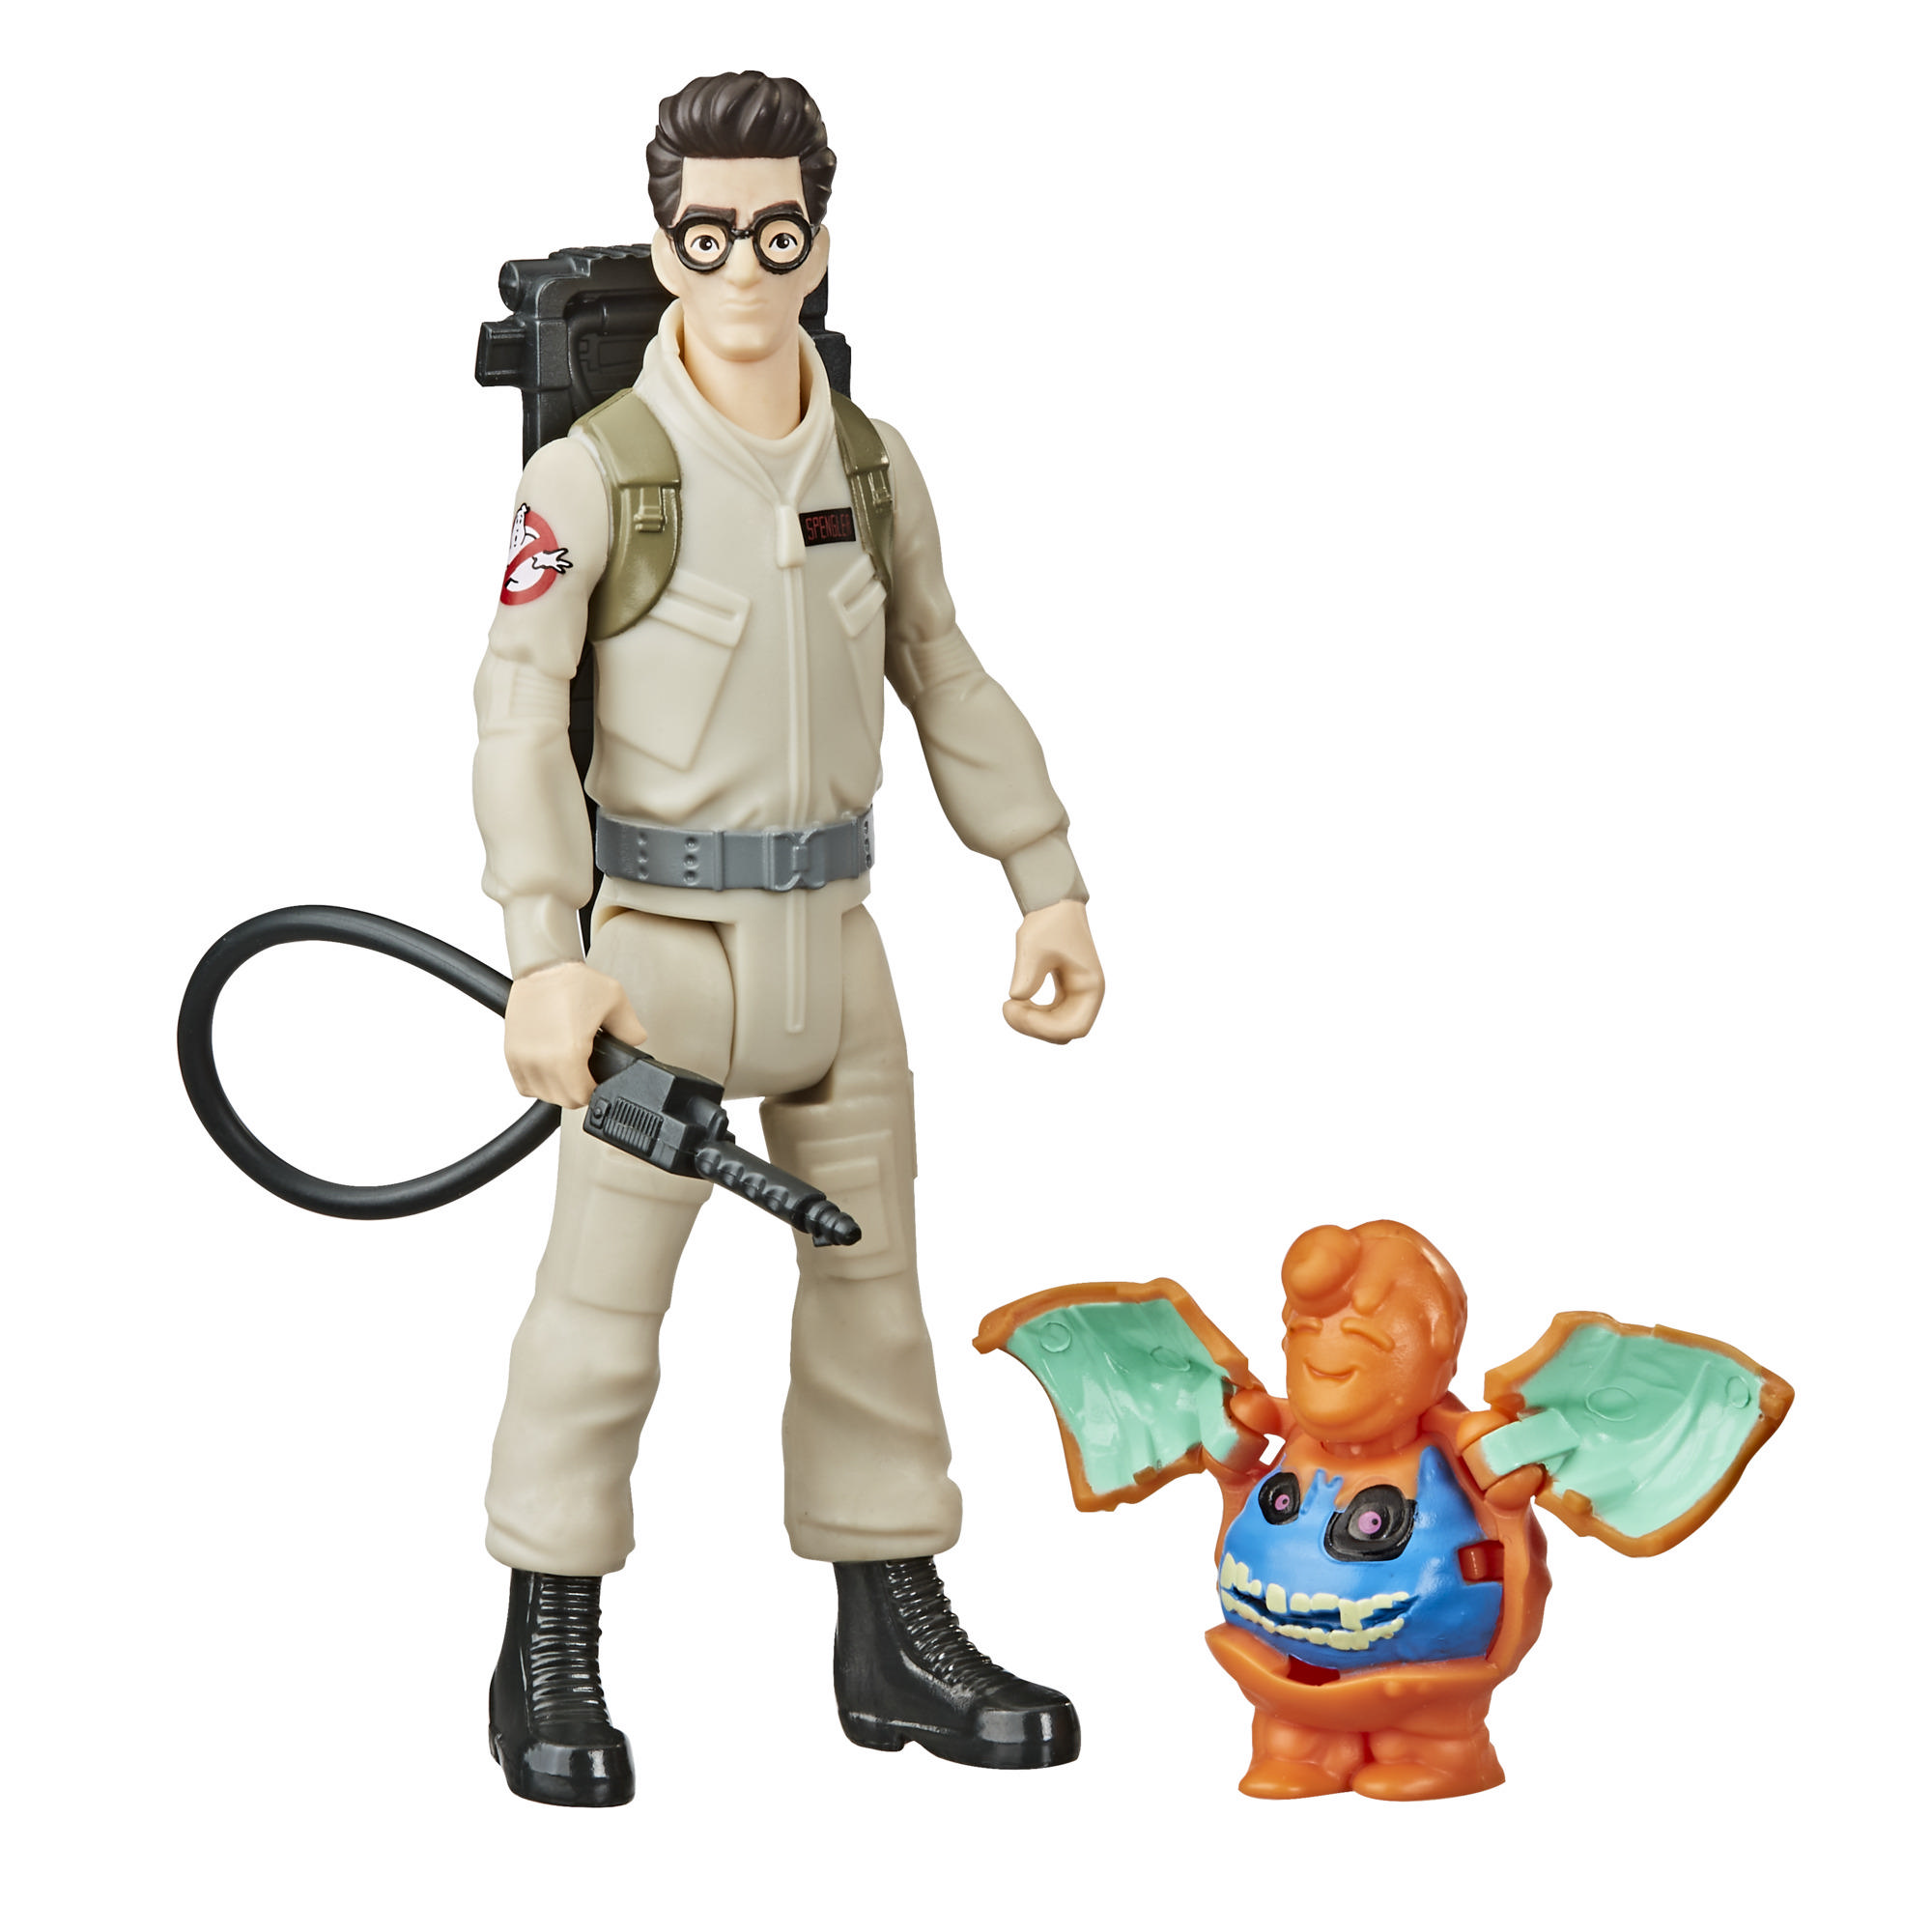 Ghostbusters Fright Features Egon Spengler Figure with Interactive Ghost Figure and Accessory for Kids Ages 4 and Up